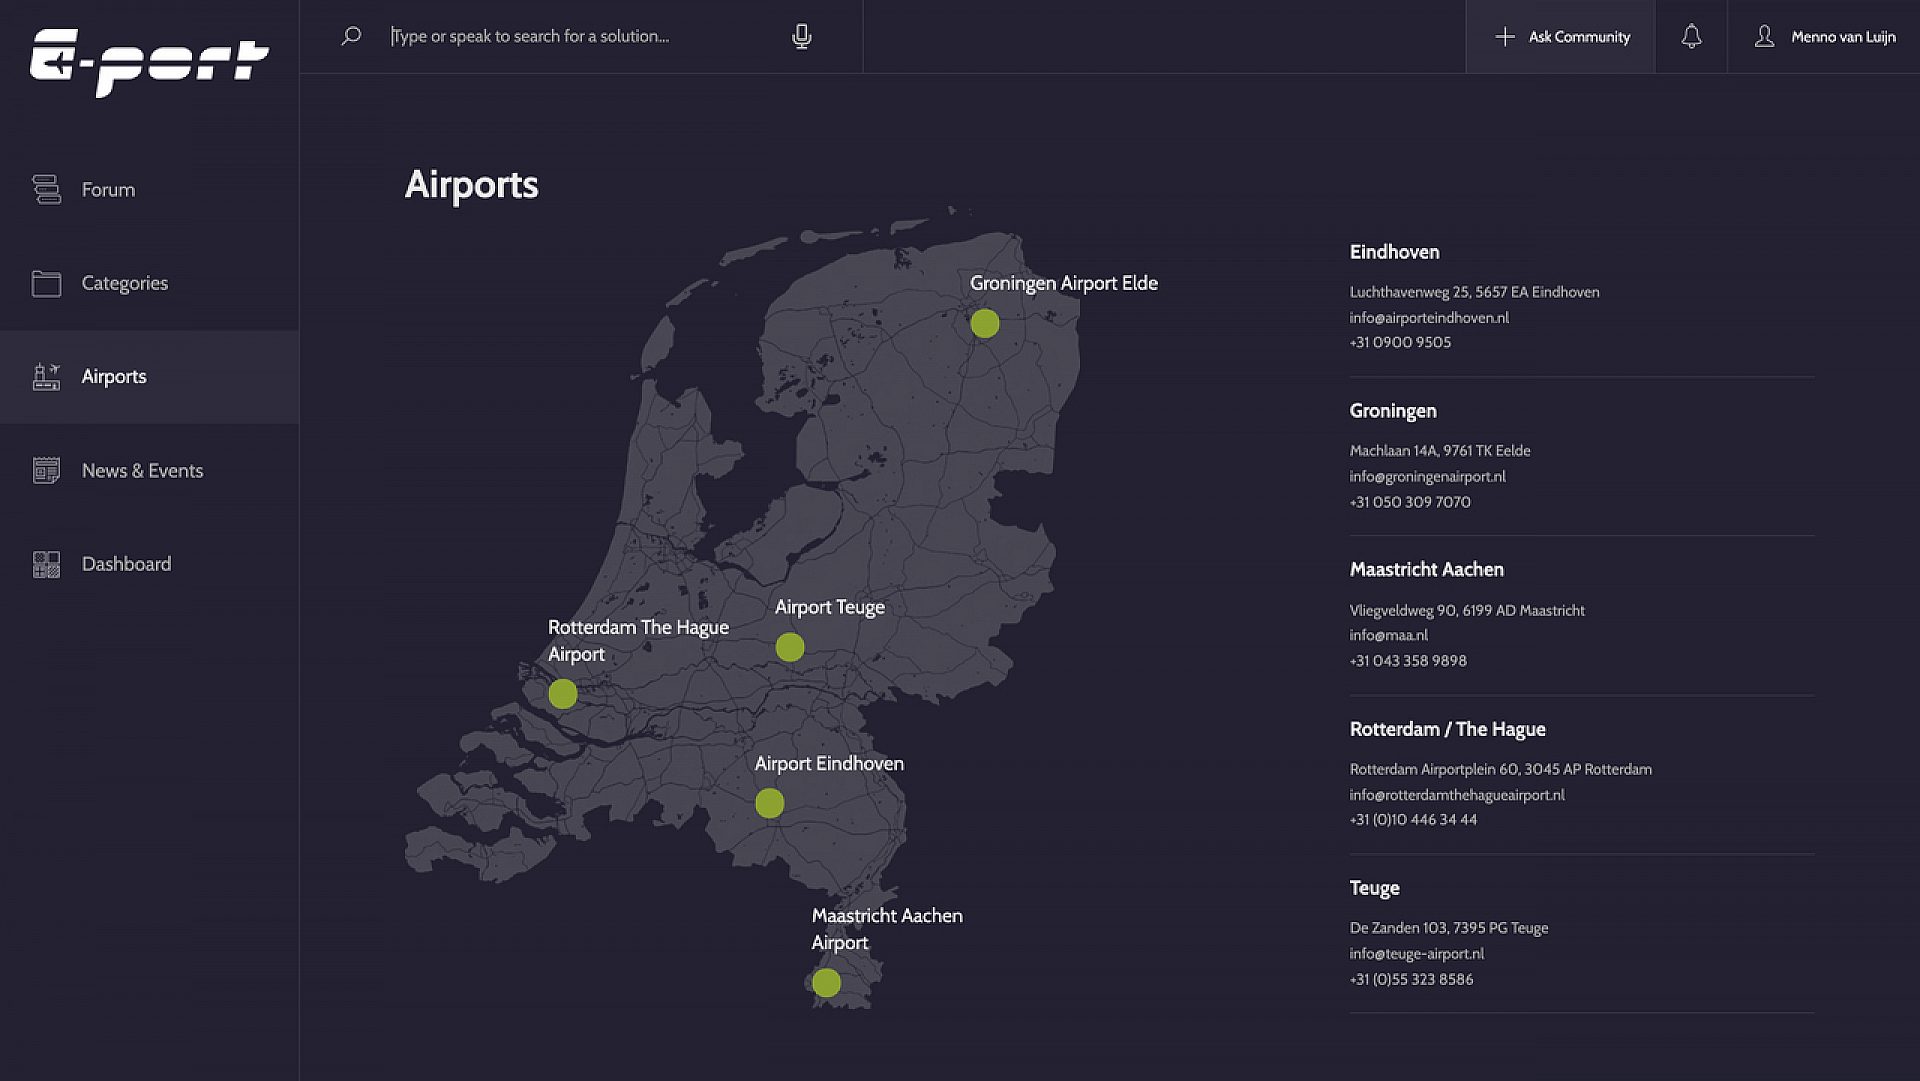 Overview of participating airports